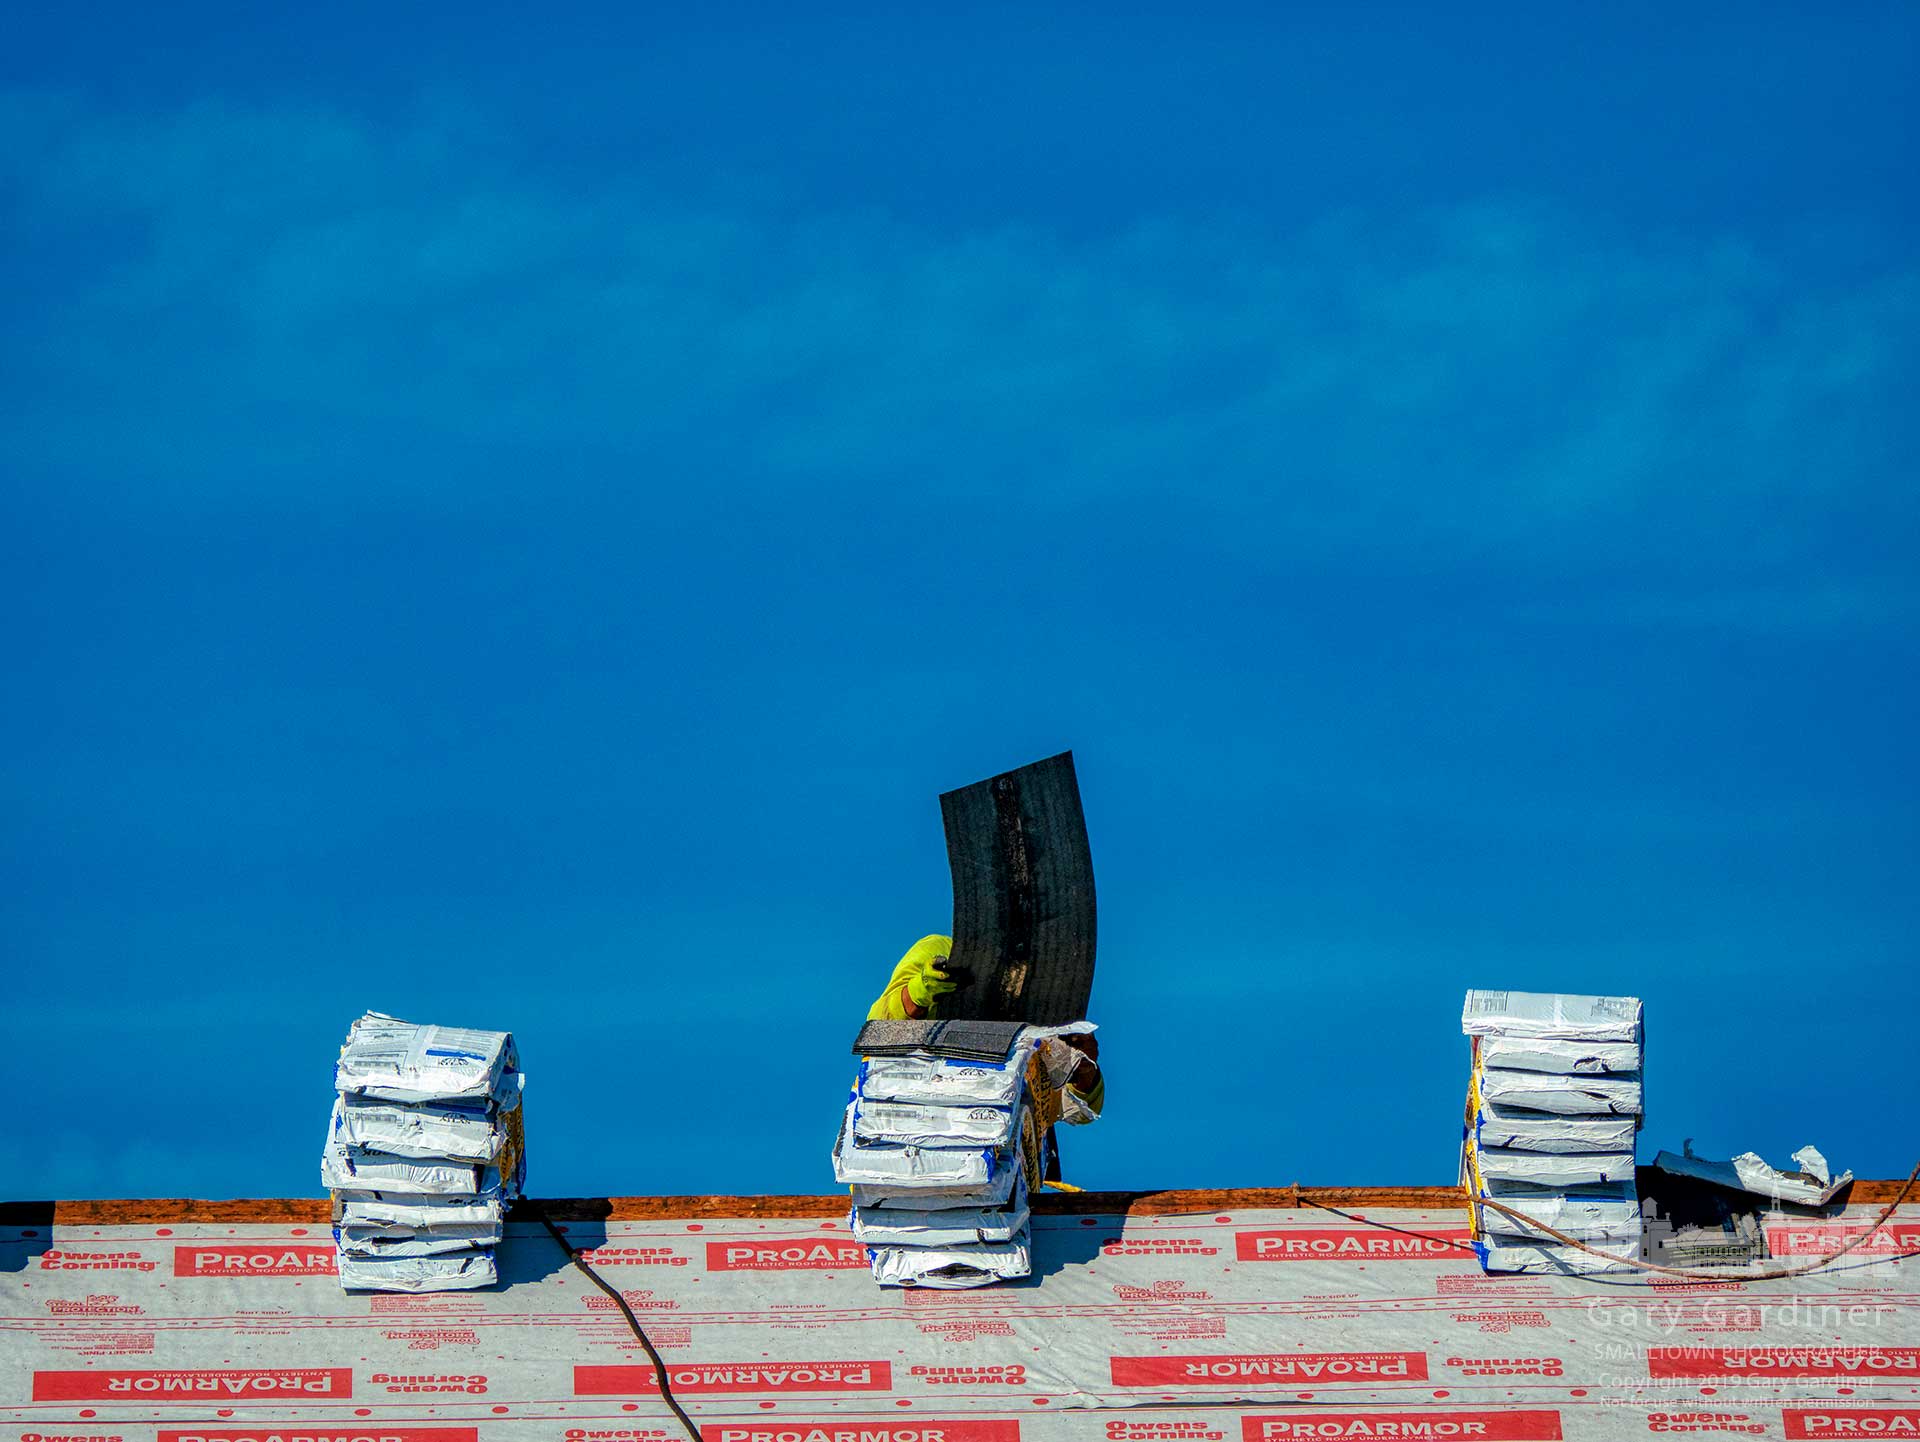 A roofer tosses a shingle from its bundle sitting on the peak of a roof being reshingled on South State Street. My Final Photo for April 3, 2019.